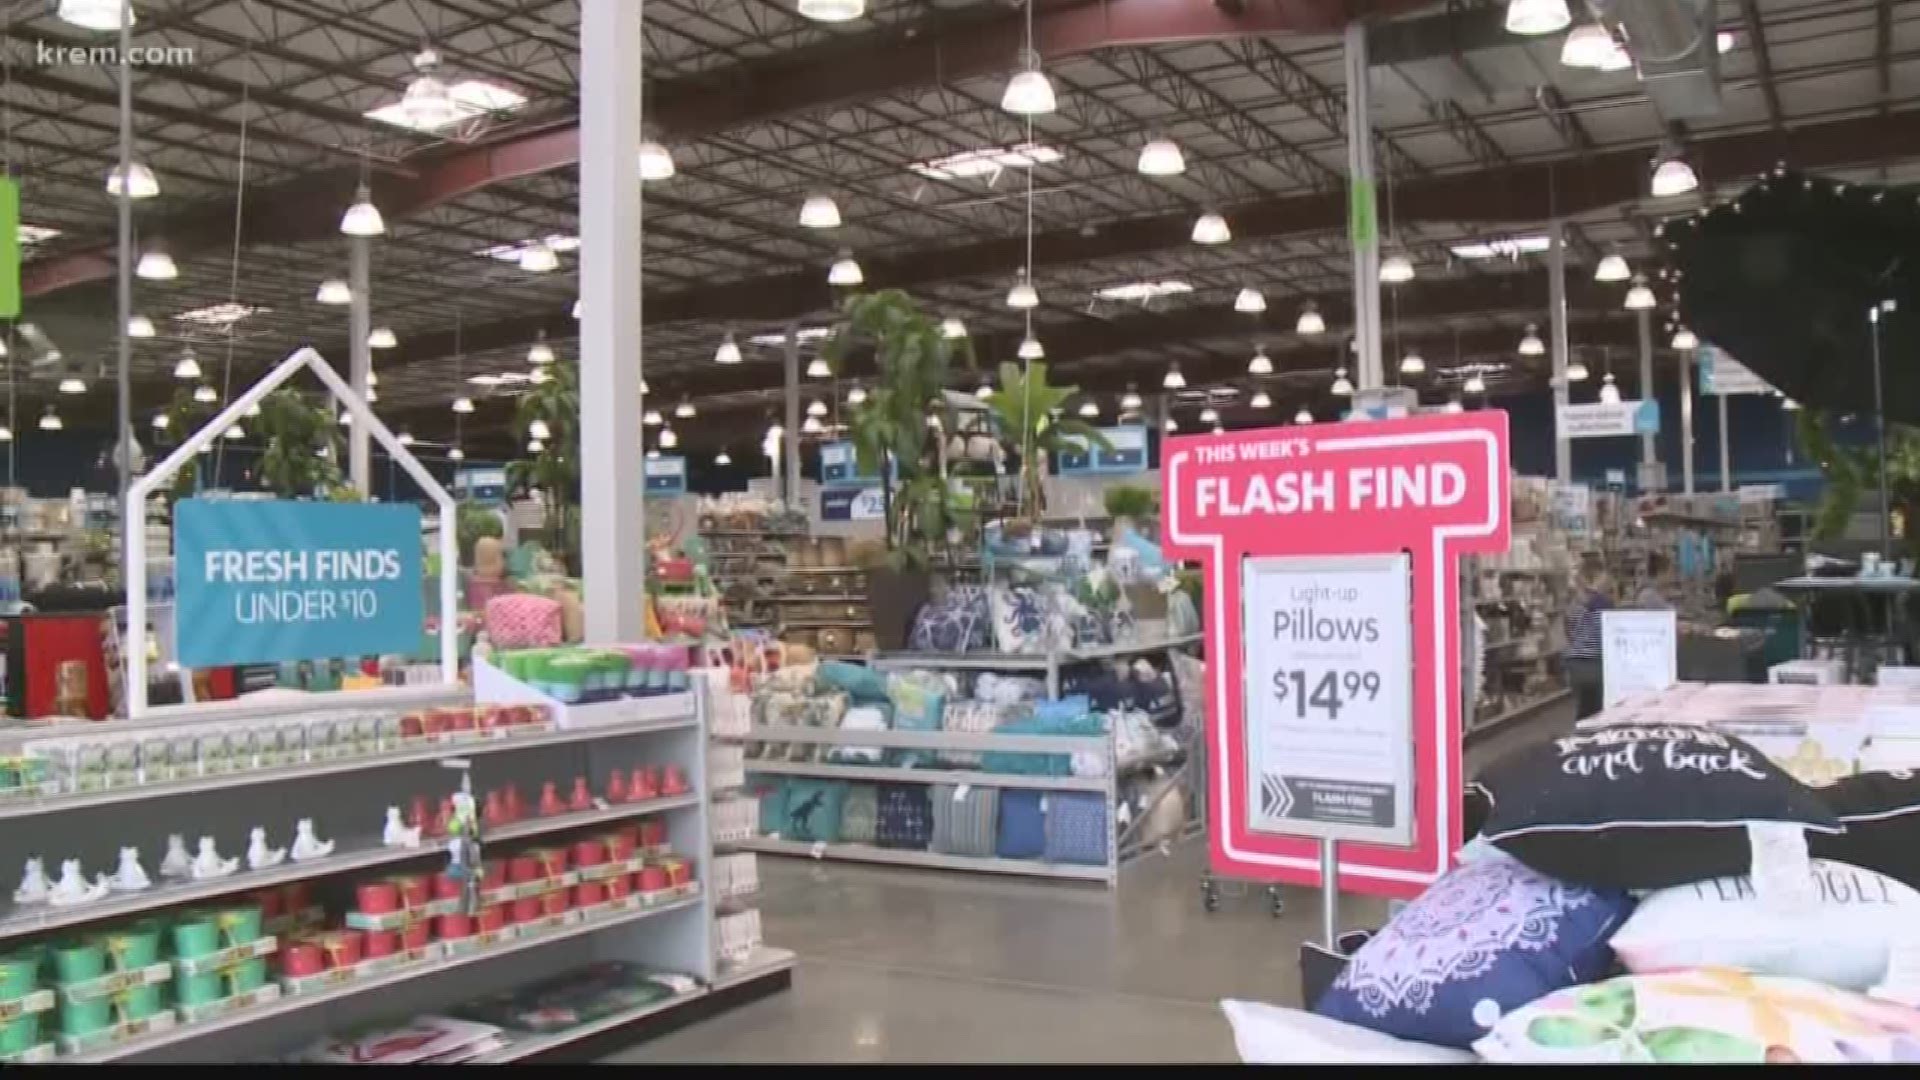 At Home Decor Superstore opens at former Spokane Costco location ...